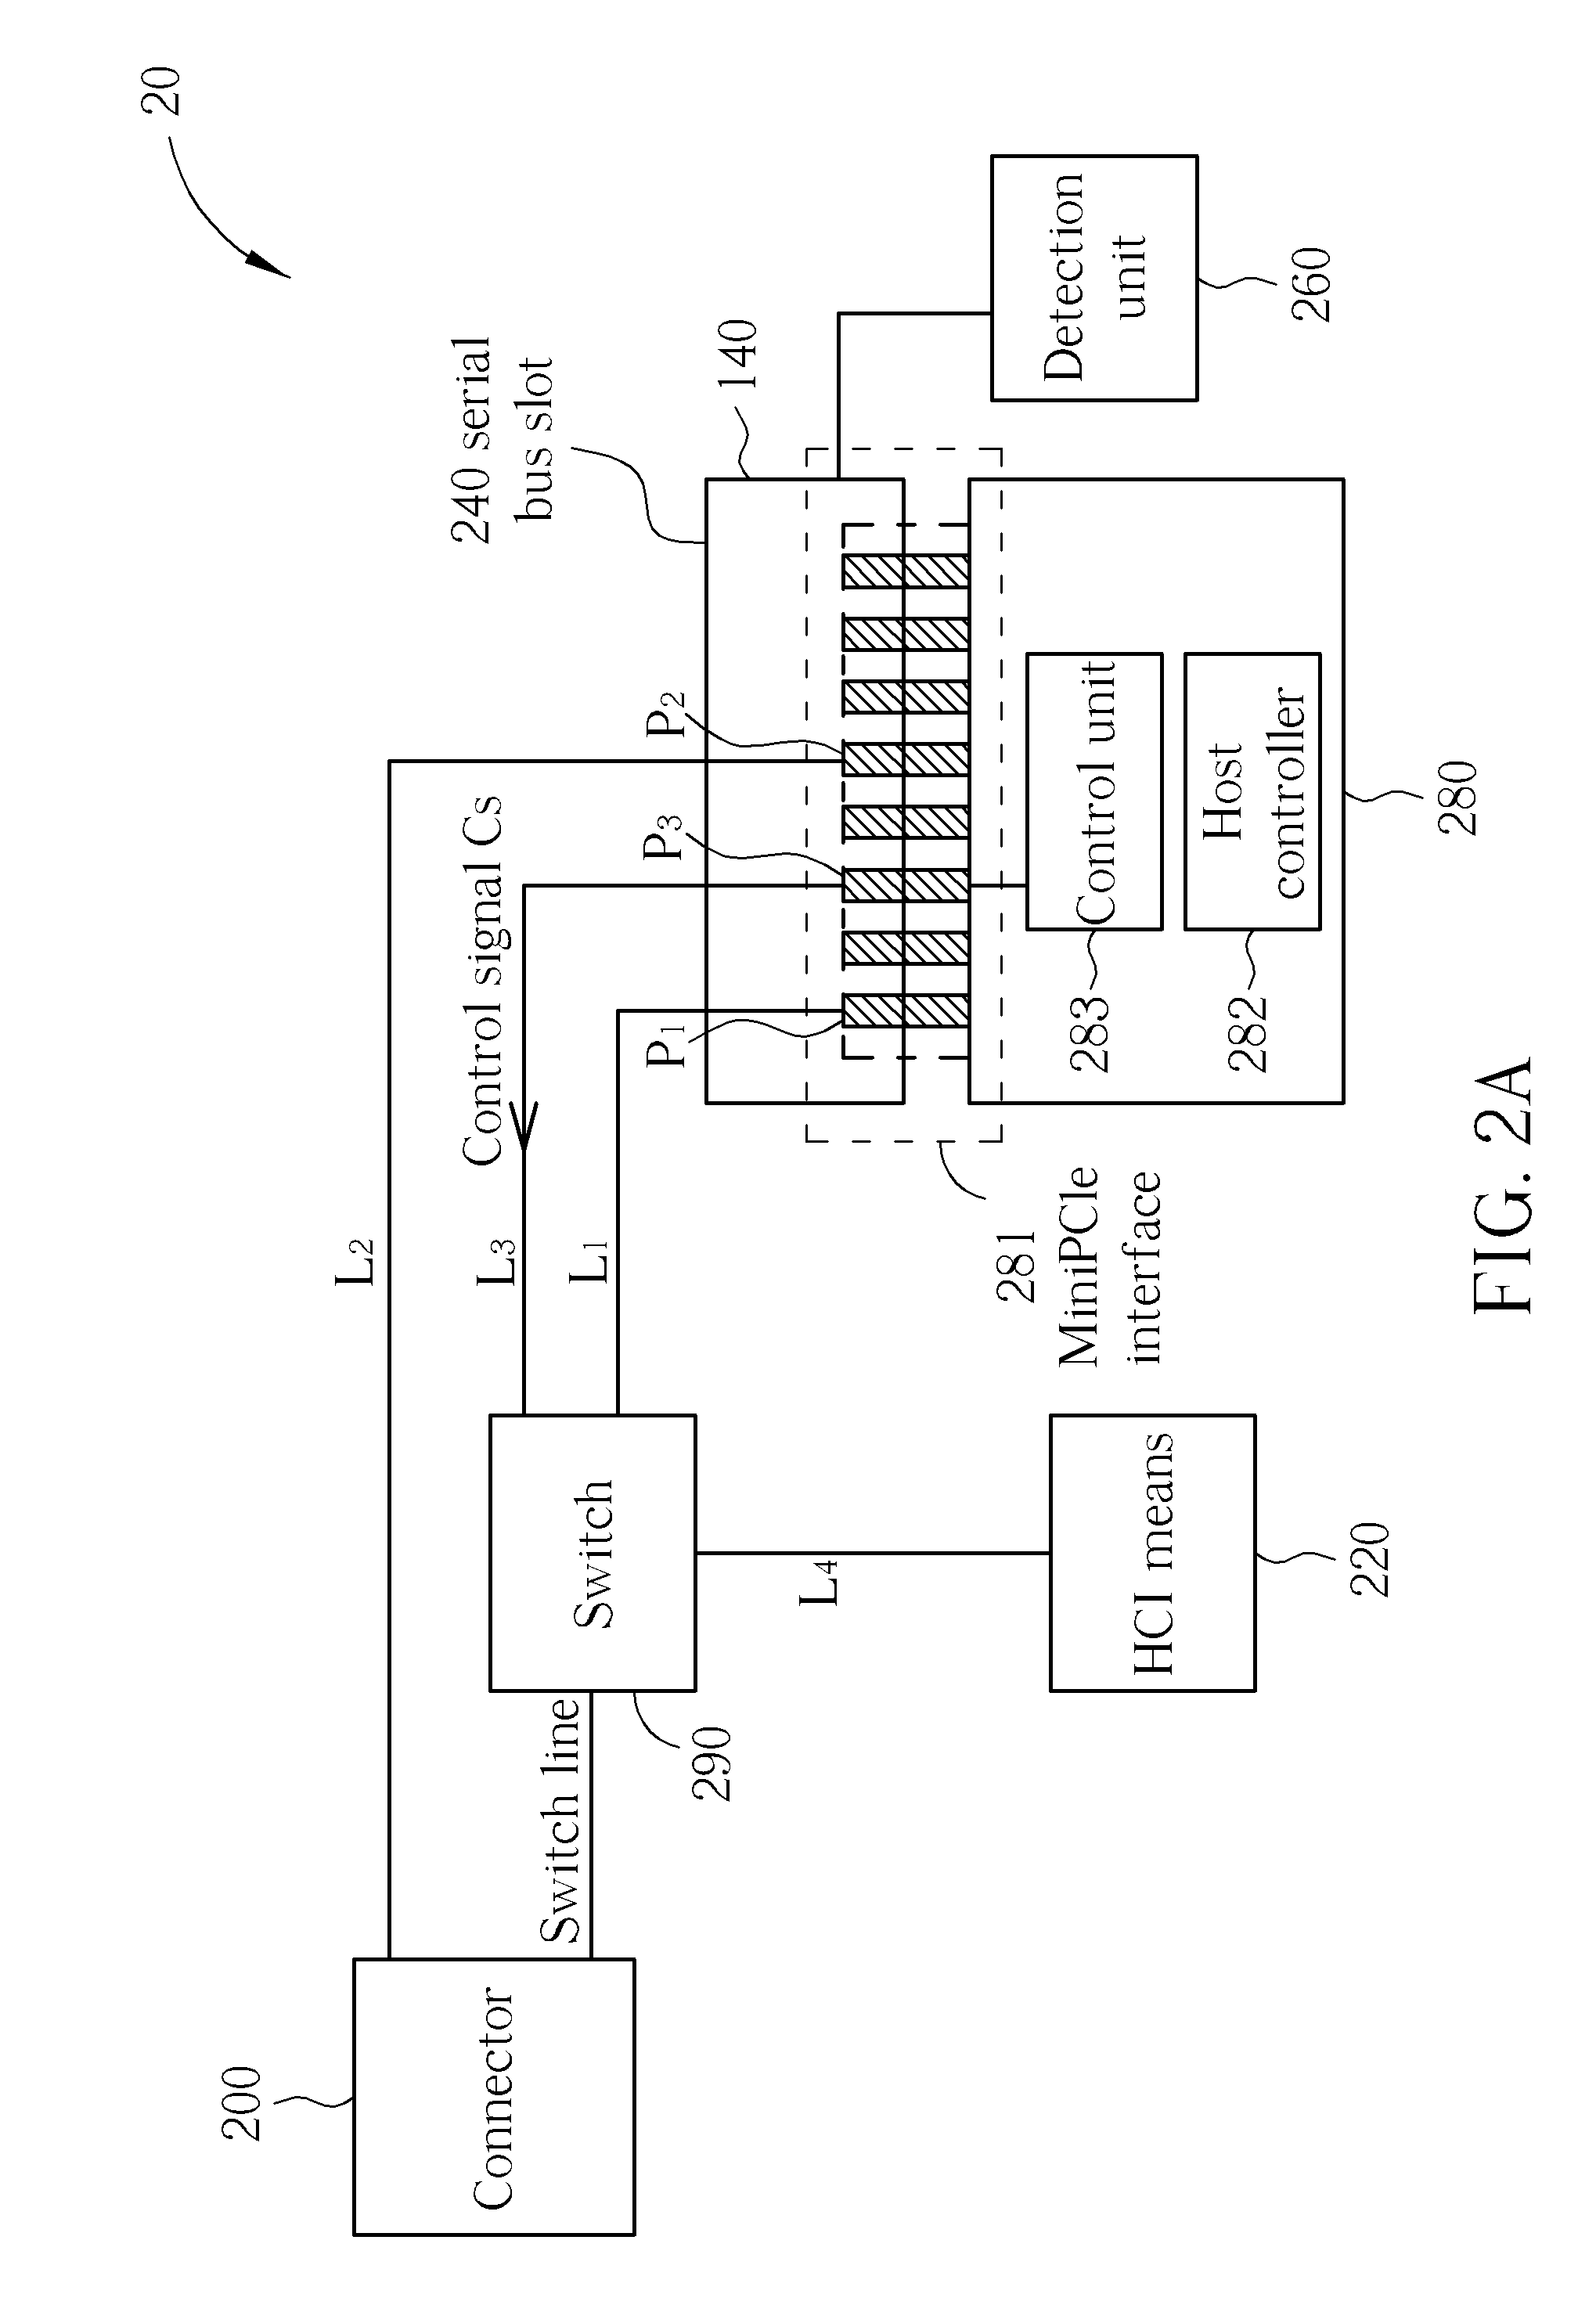 Motherboard Compatible with Multiple Versions of Universal Serial Bus (USB) and Related Method